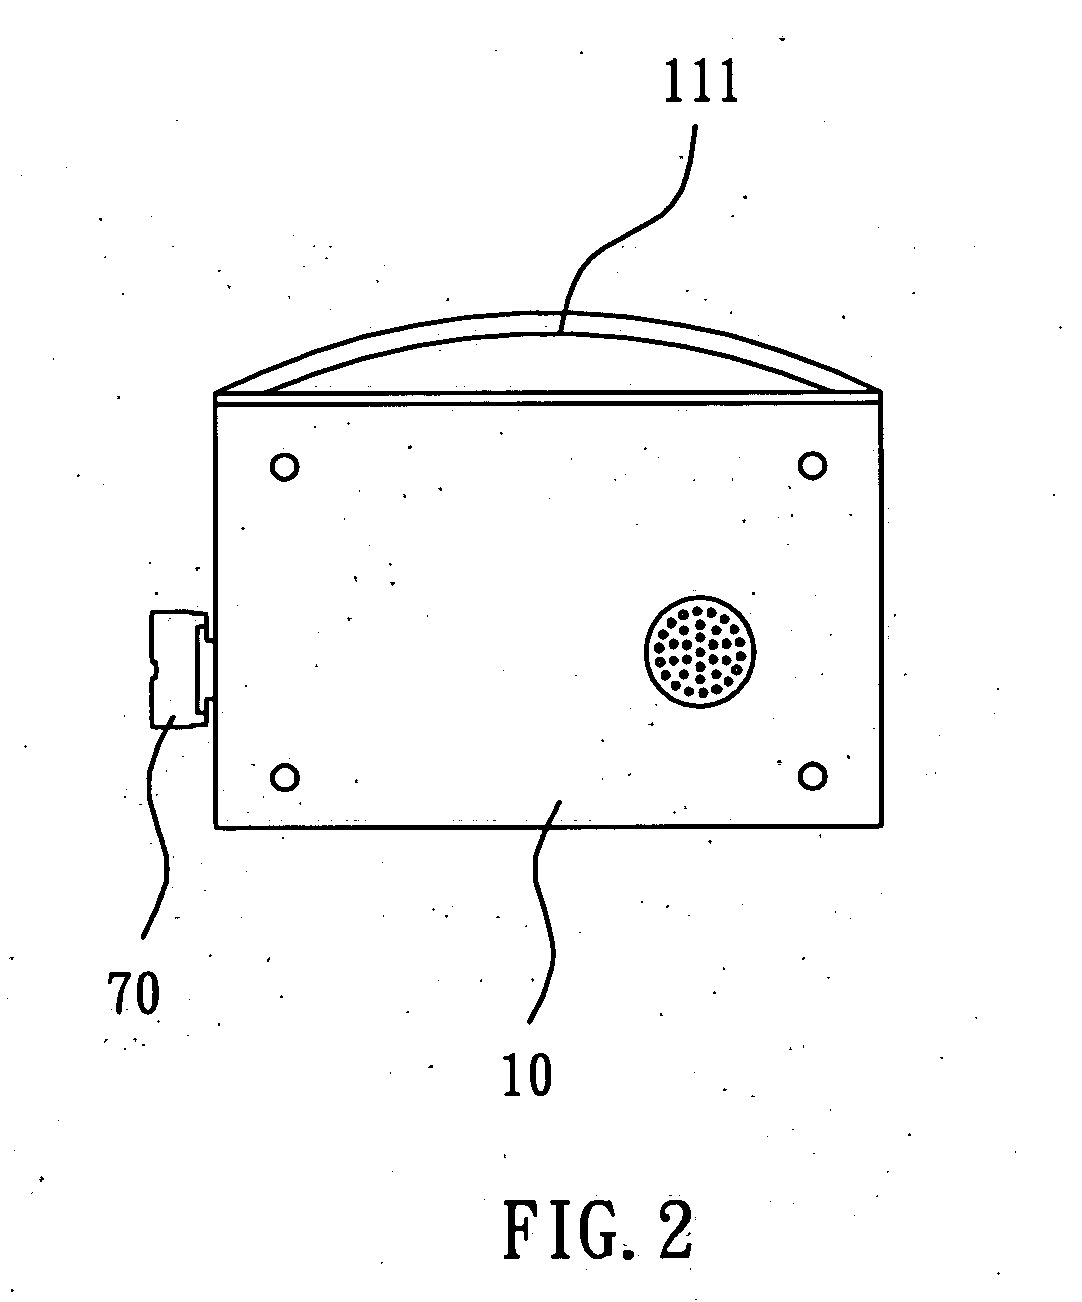 Mobile teaching aid with audiovisual amusement device